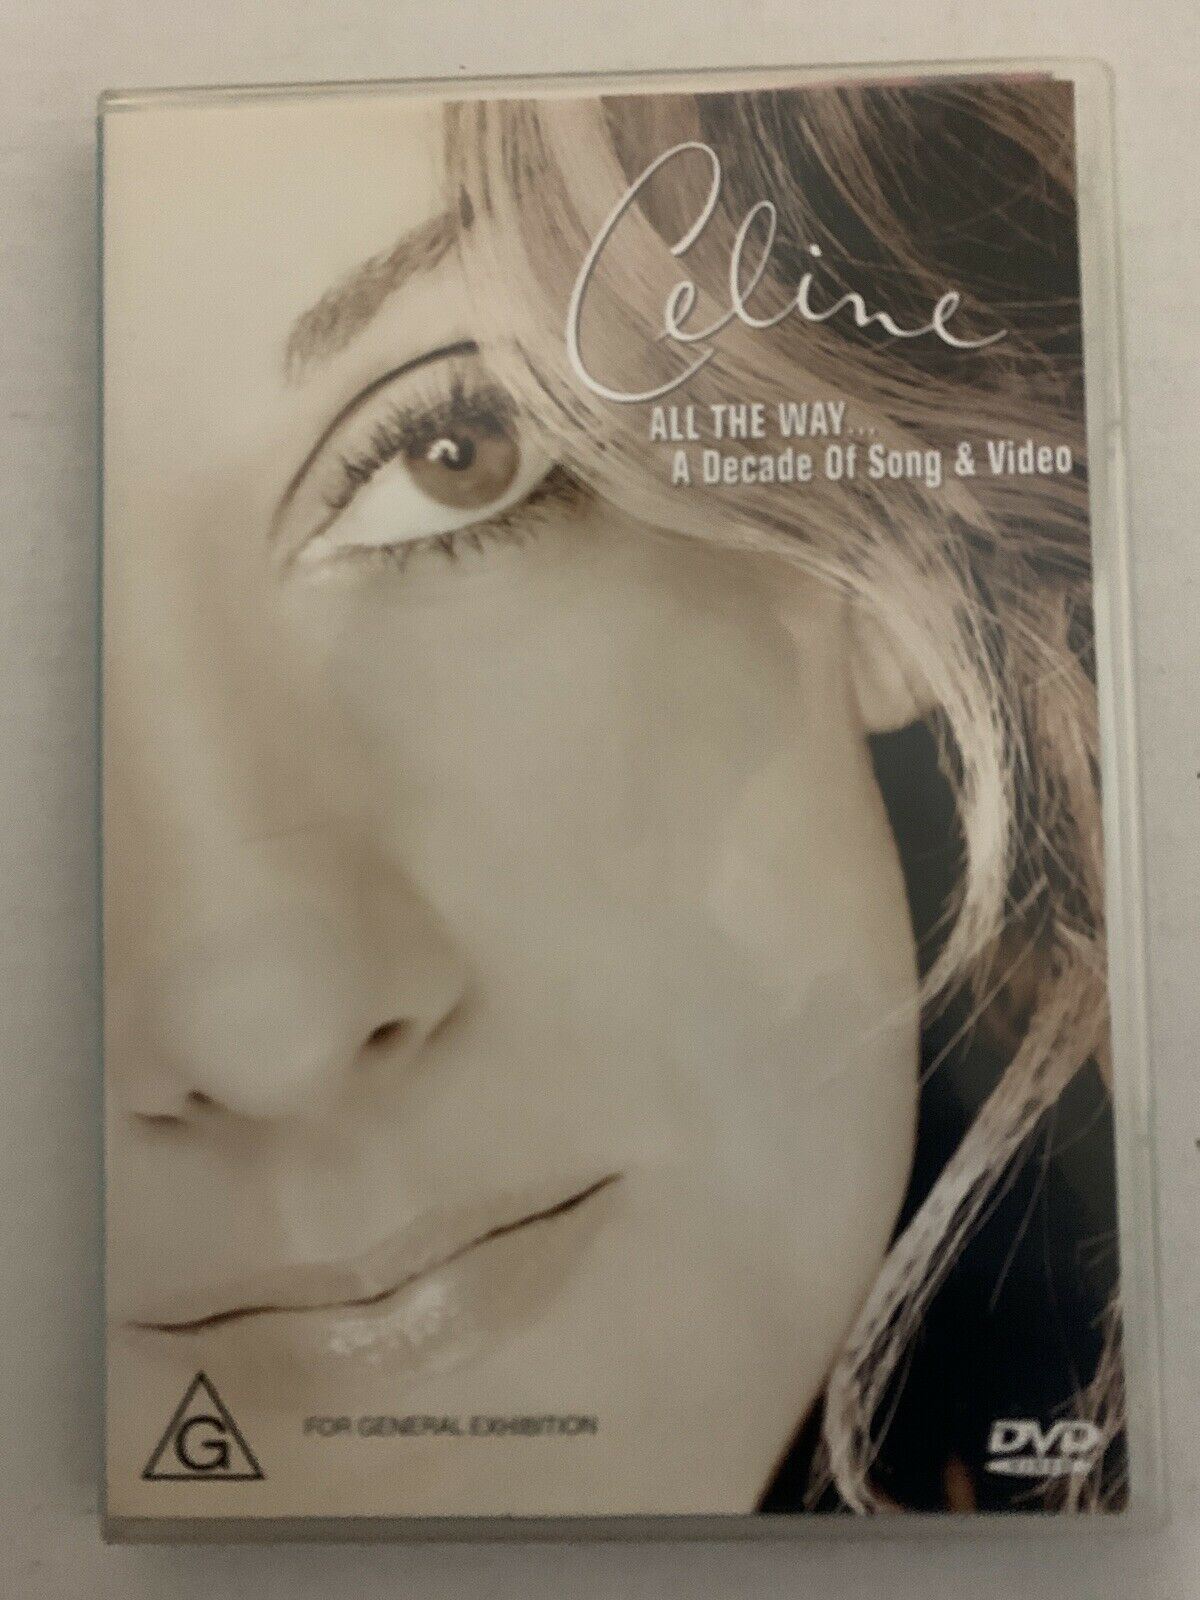 Celine Dion - All The Way - A Decade Of Song & Video (DVD, 2000)